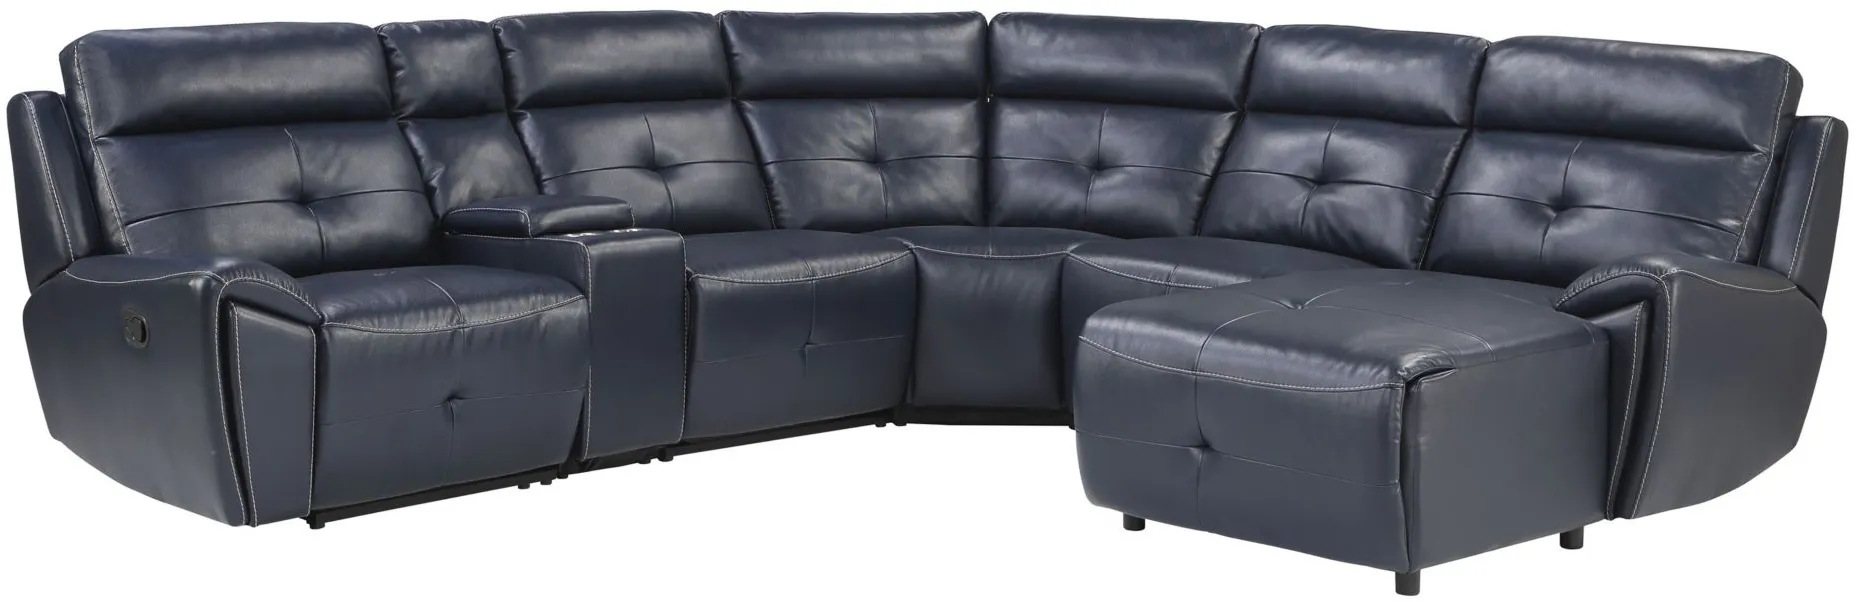 Morelia 6-pc Modular Reclining Sectional Sofa With Right Arm Facing Chaise in Navy Blue by Homelegance